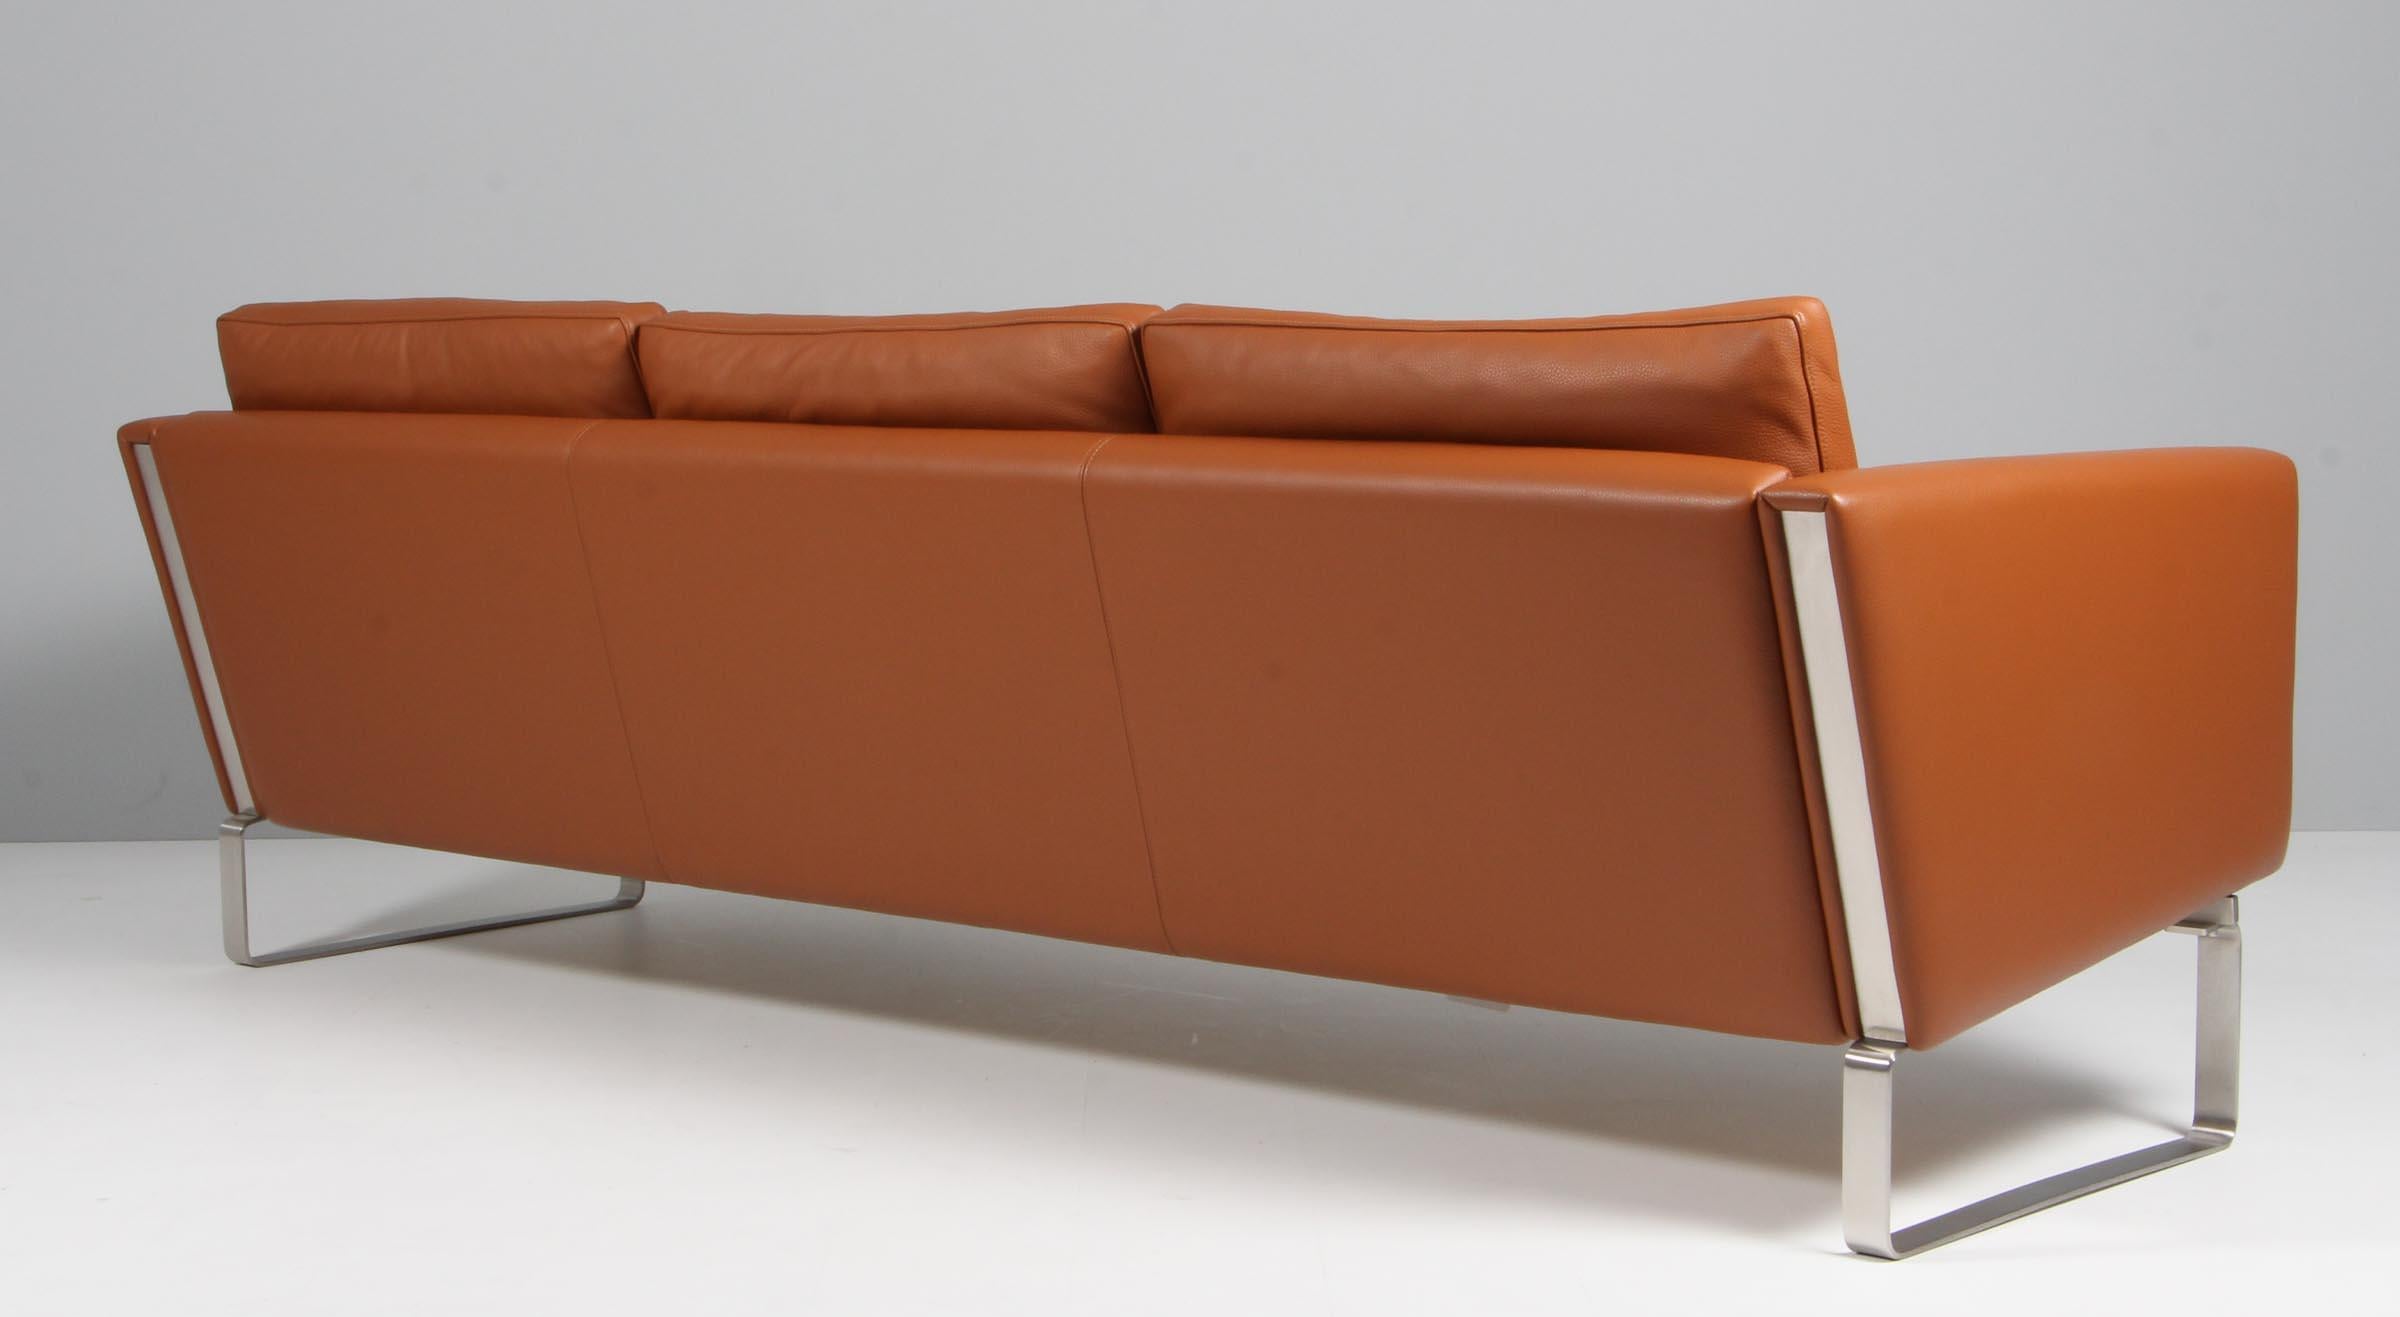 Hans J. Wegner three seat sofa with cognac leather frame and base of stainless steel. 

Model CH103, made by Carl Hansen.